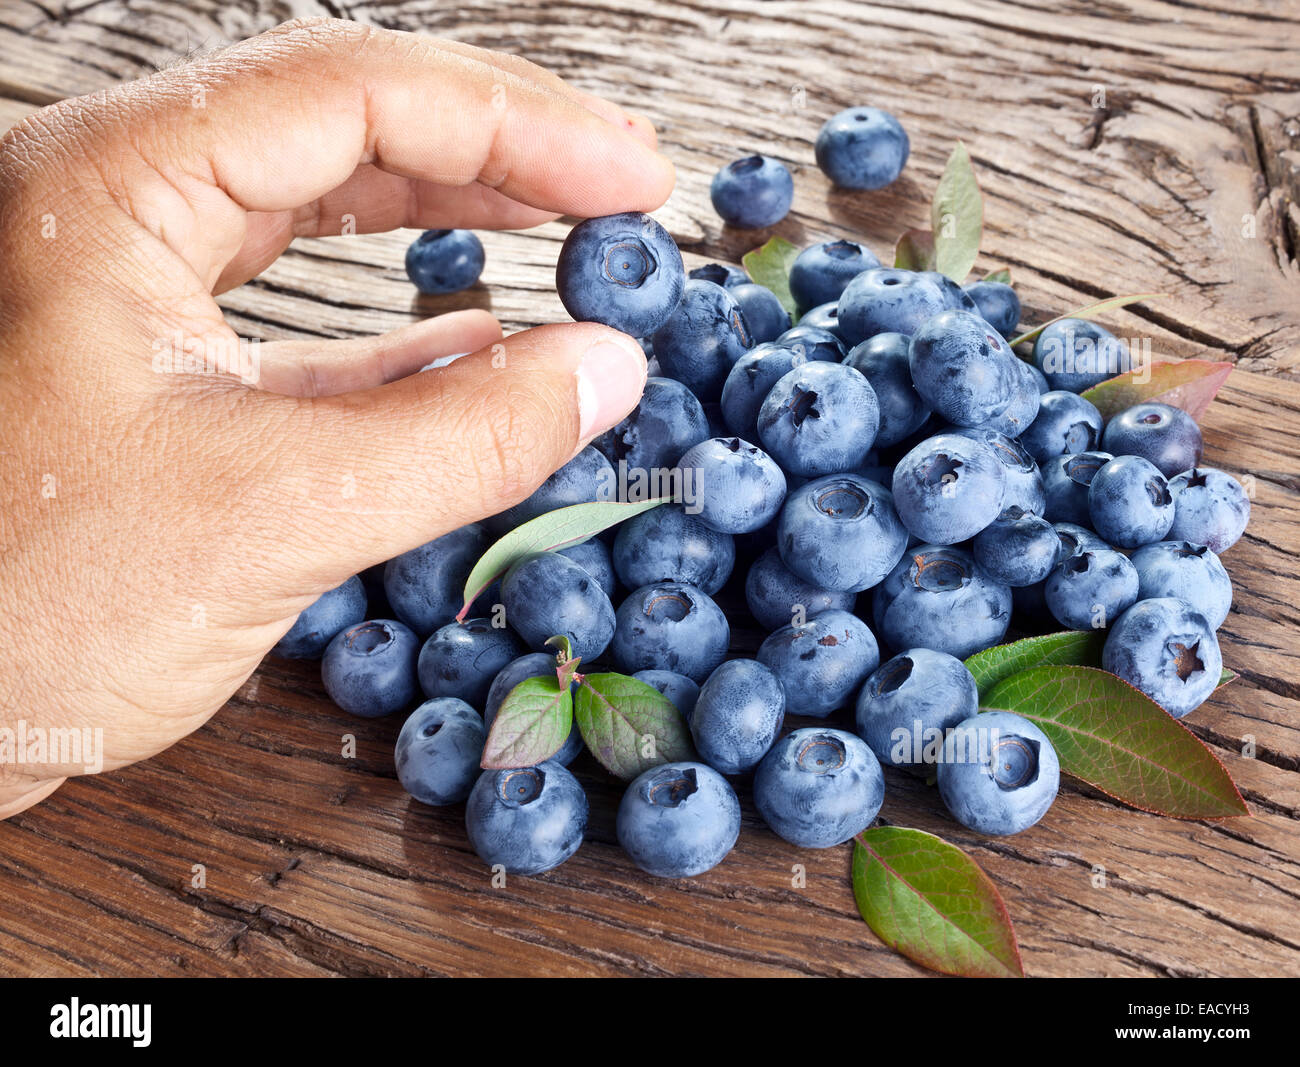 Blueberry in the man's hand. Blueberries over old wooden table in the background. Stock Photo